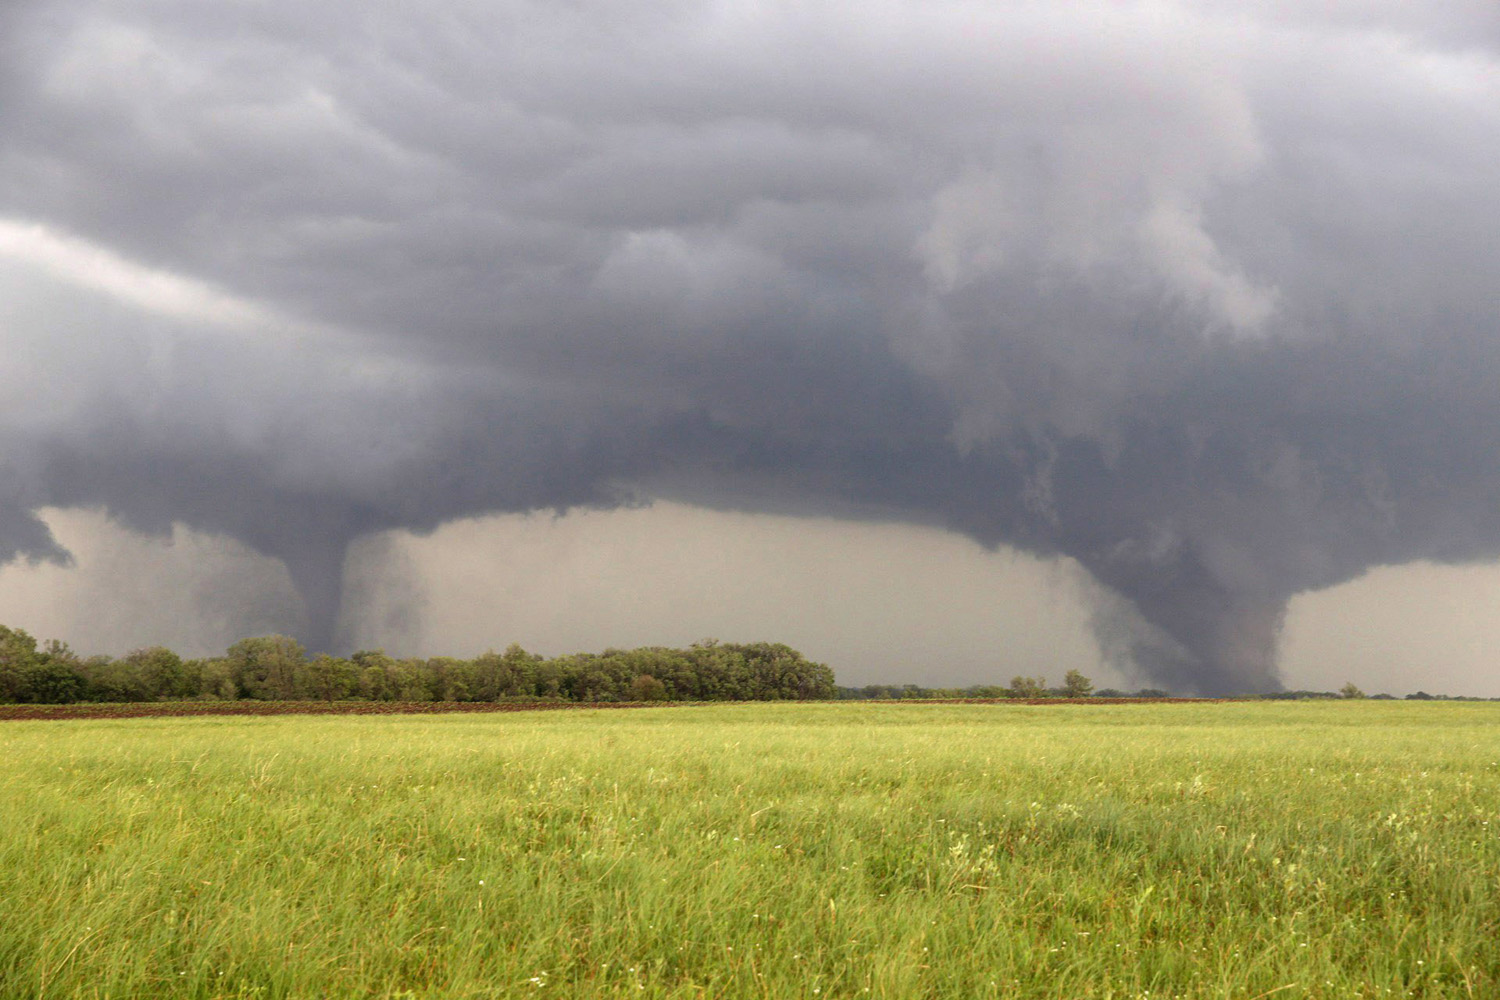 Two tornados approach  Pilger, Neb., on June 16, 2014.